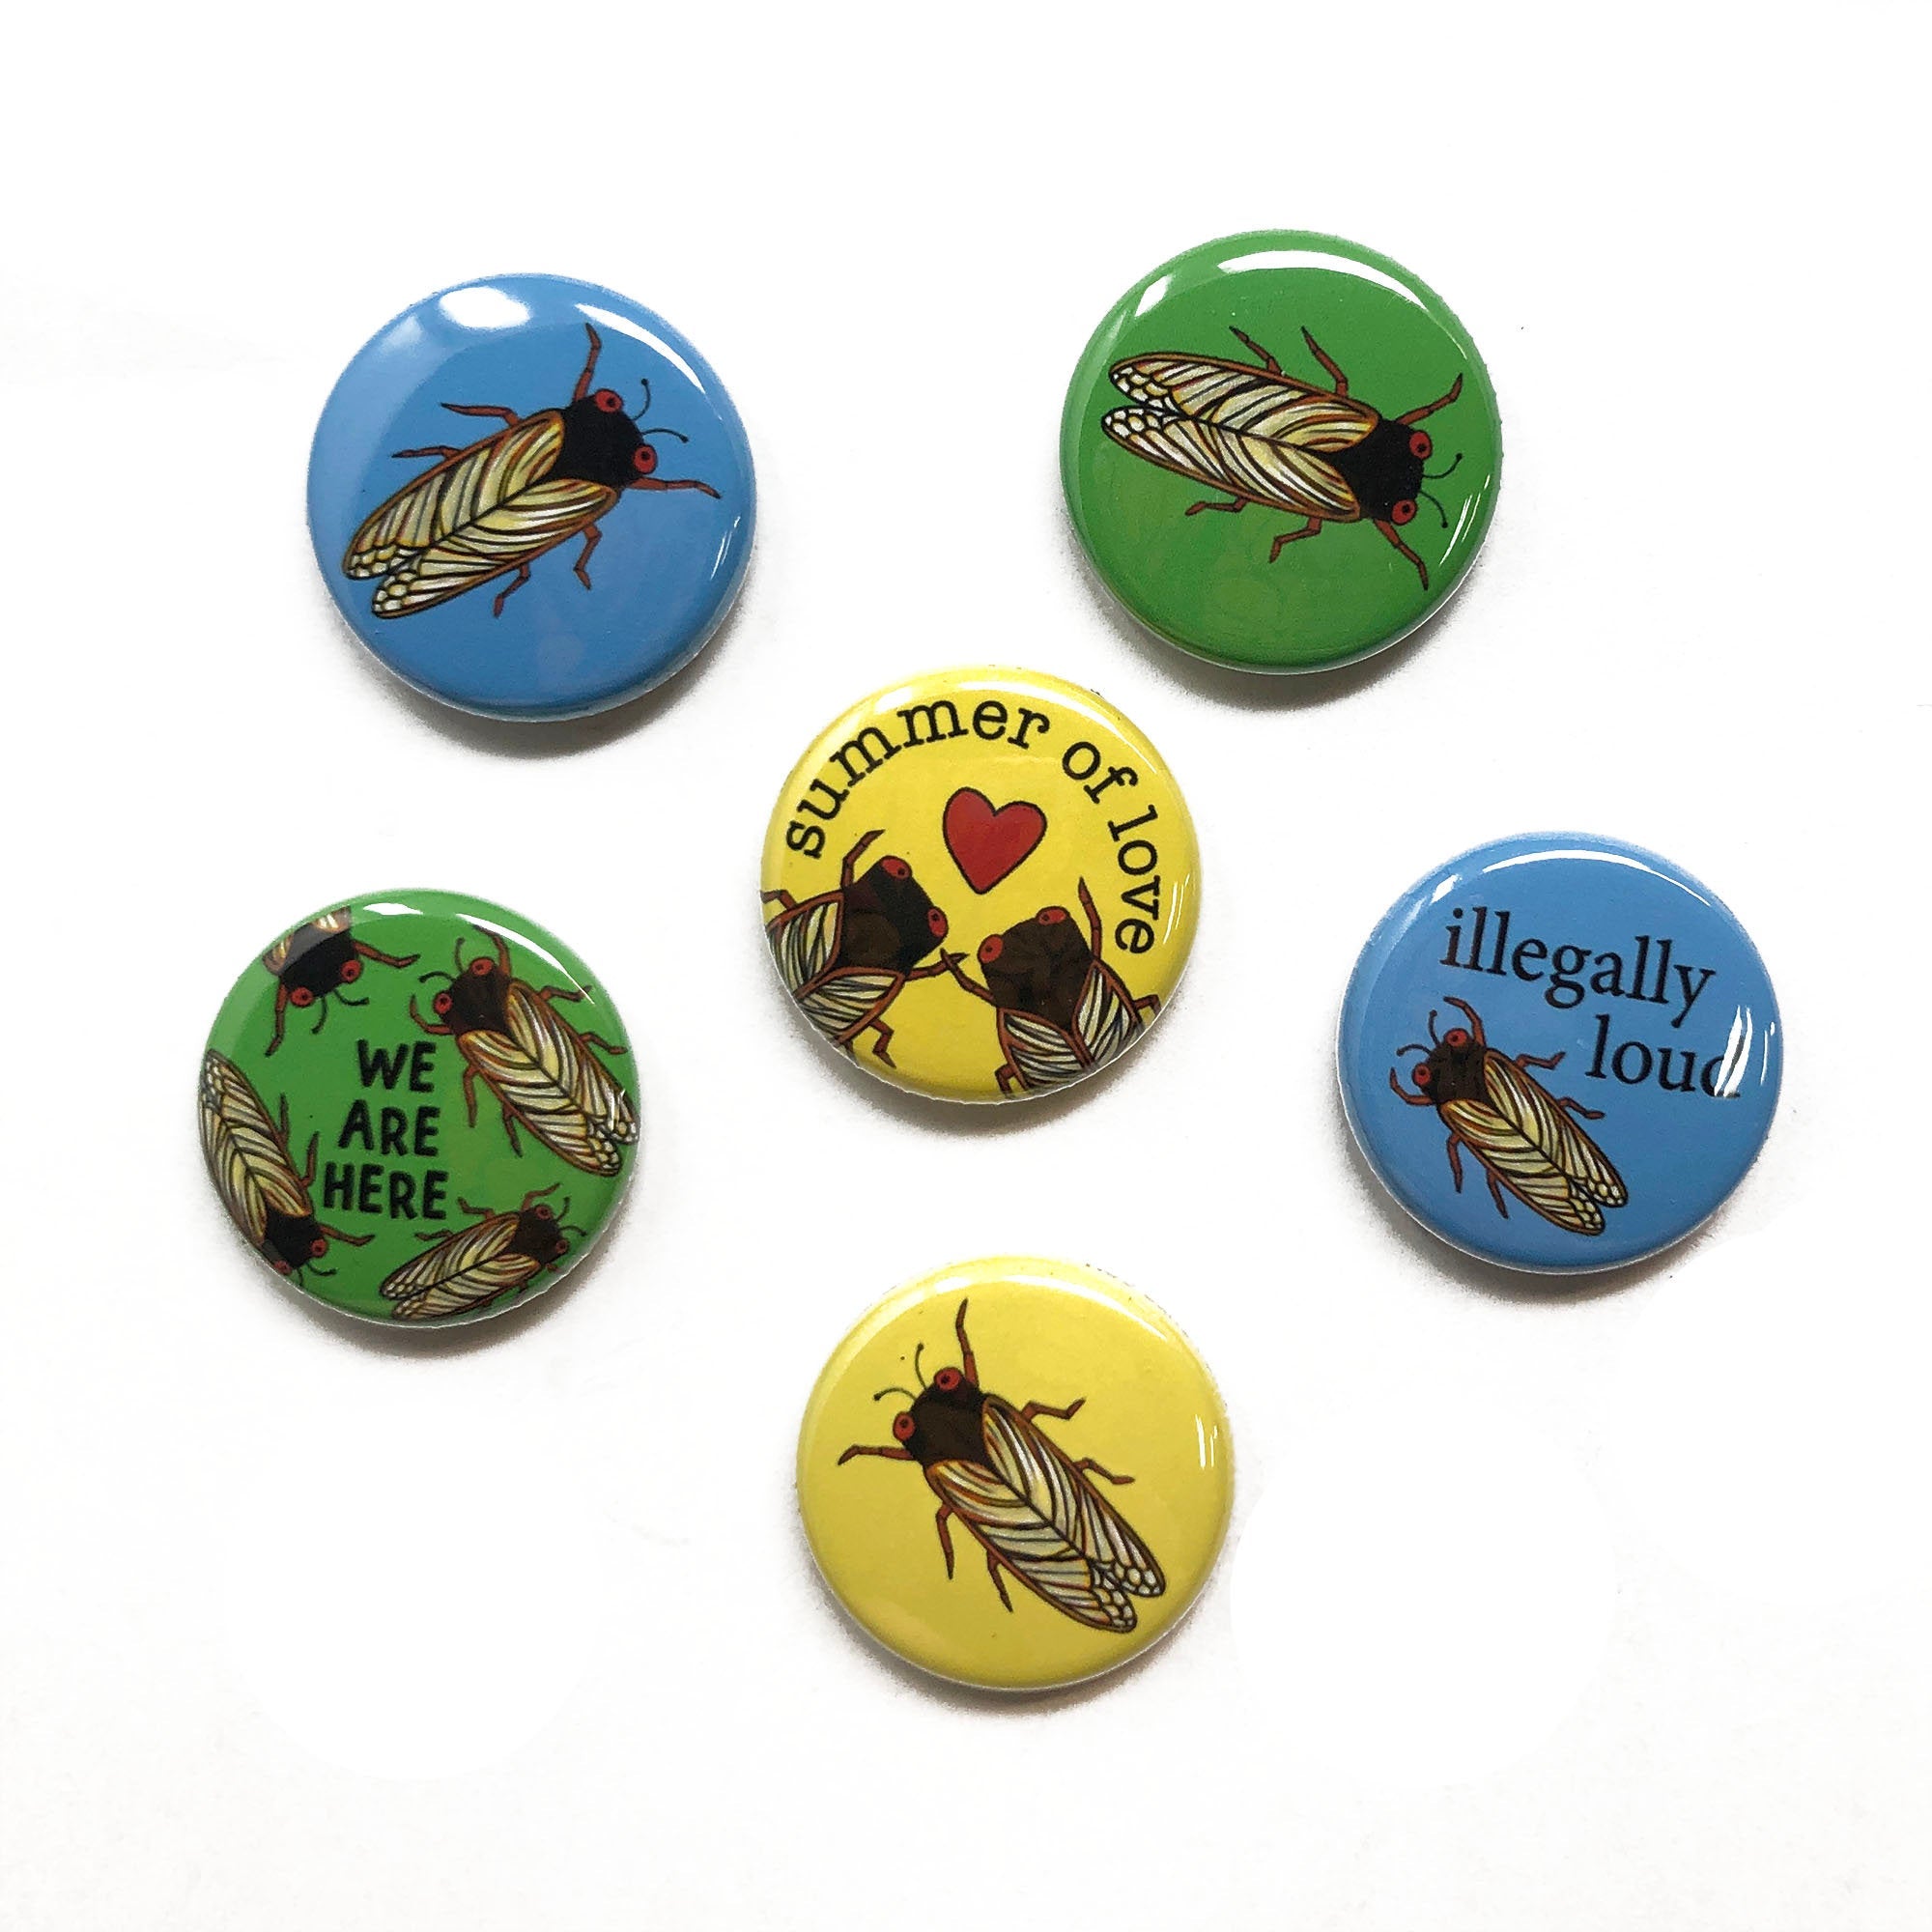 Cicada Magnet or Cicada Pin Back Button Set - Brood X - Cicada Summer 2021 - Insect Pins or Magnets - Set of 6, One inch